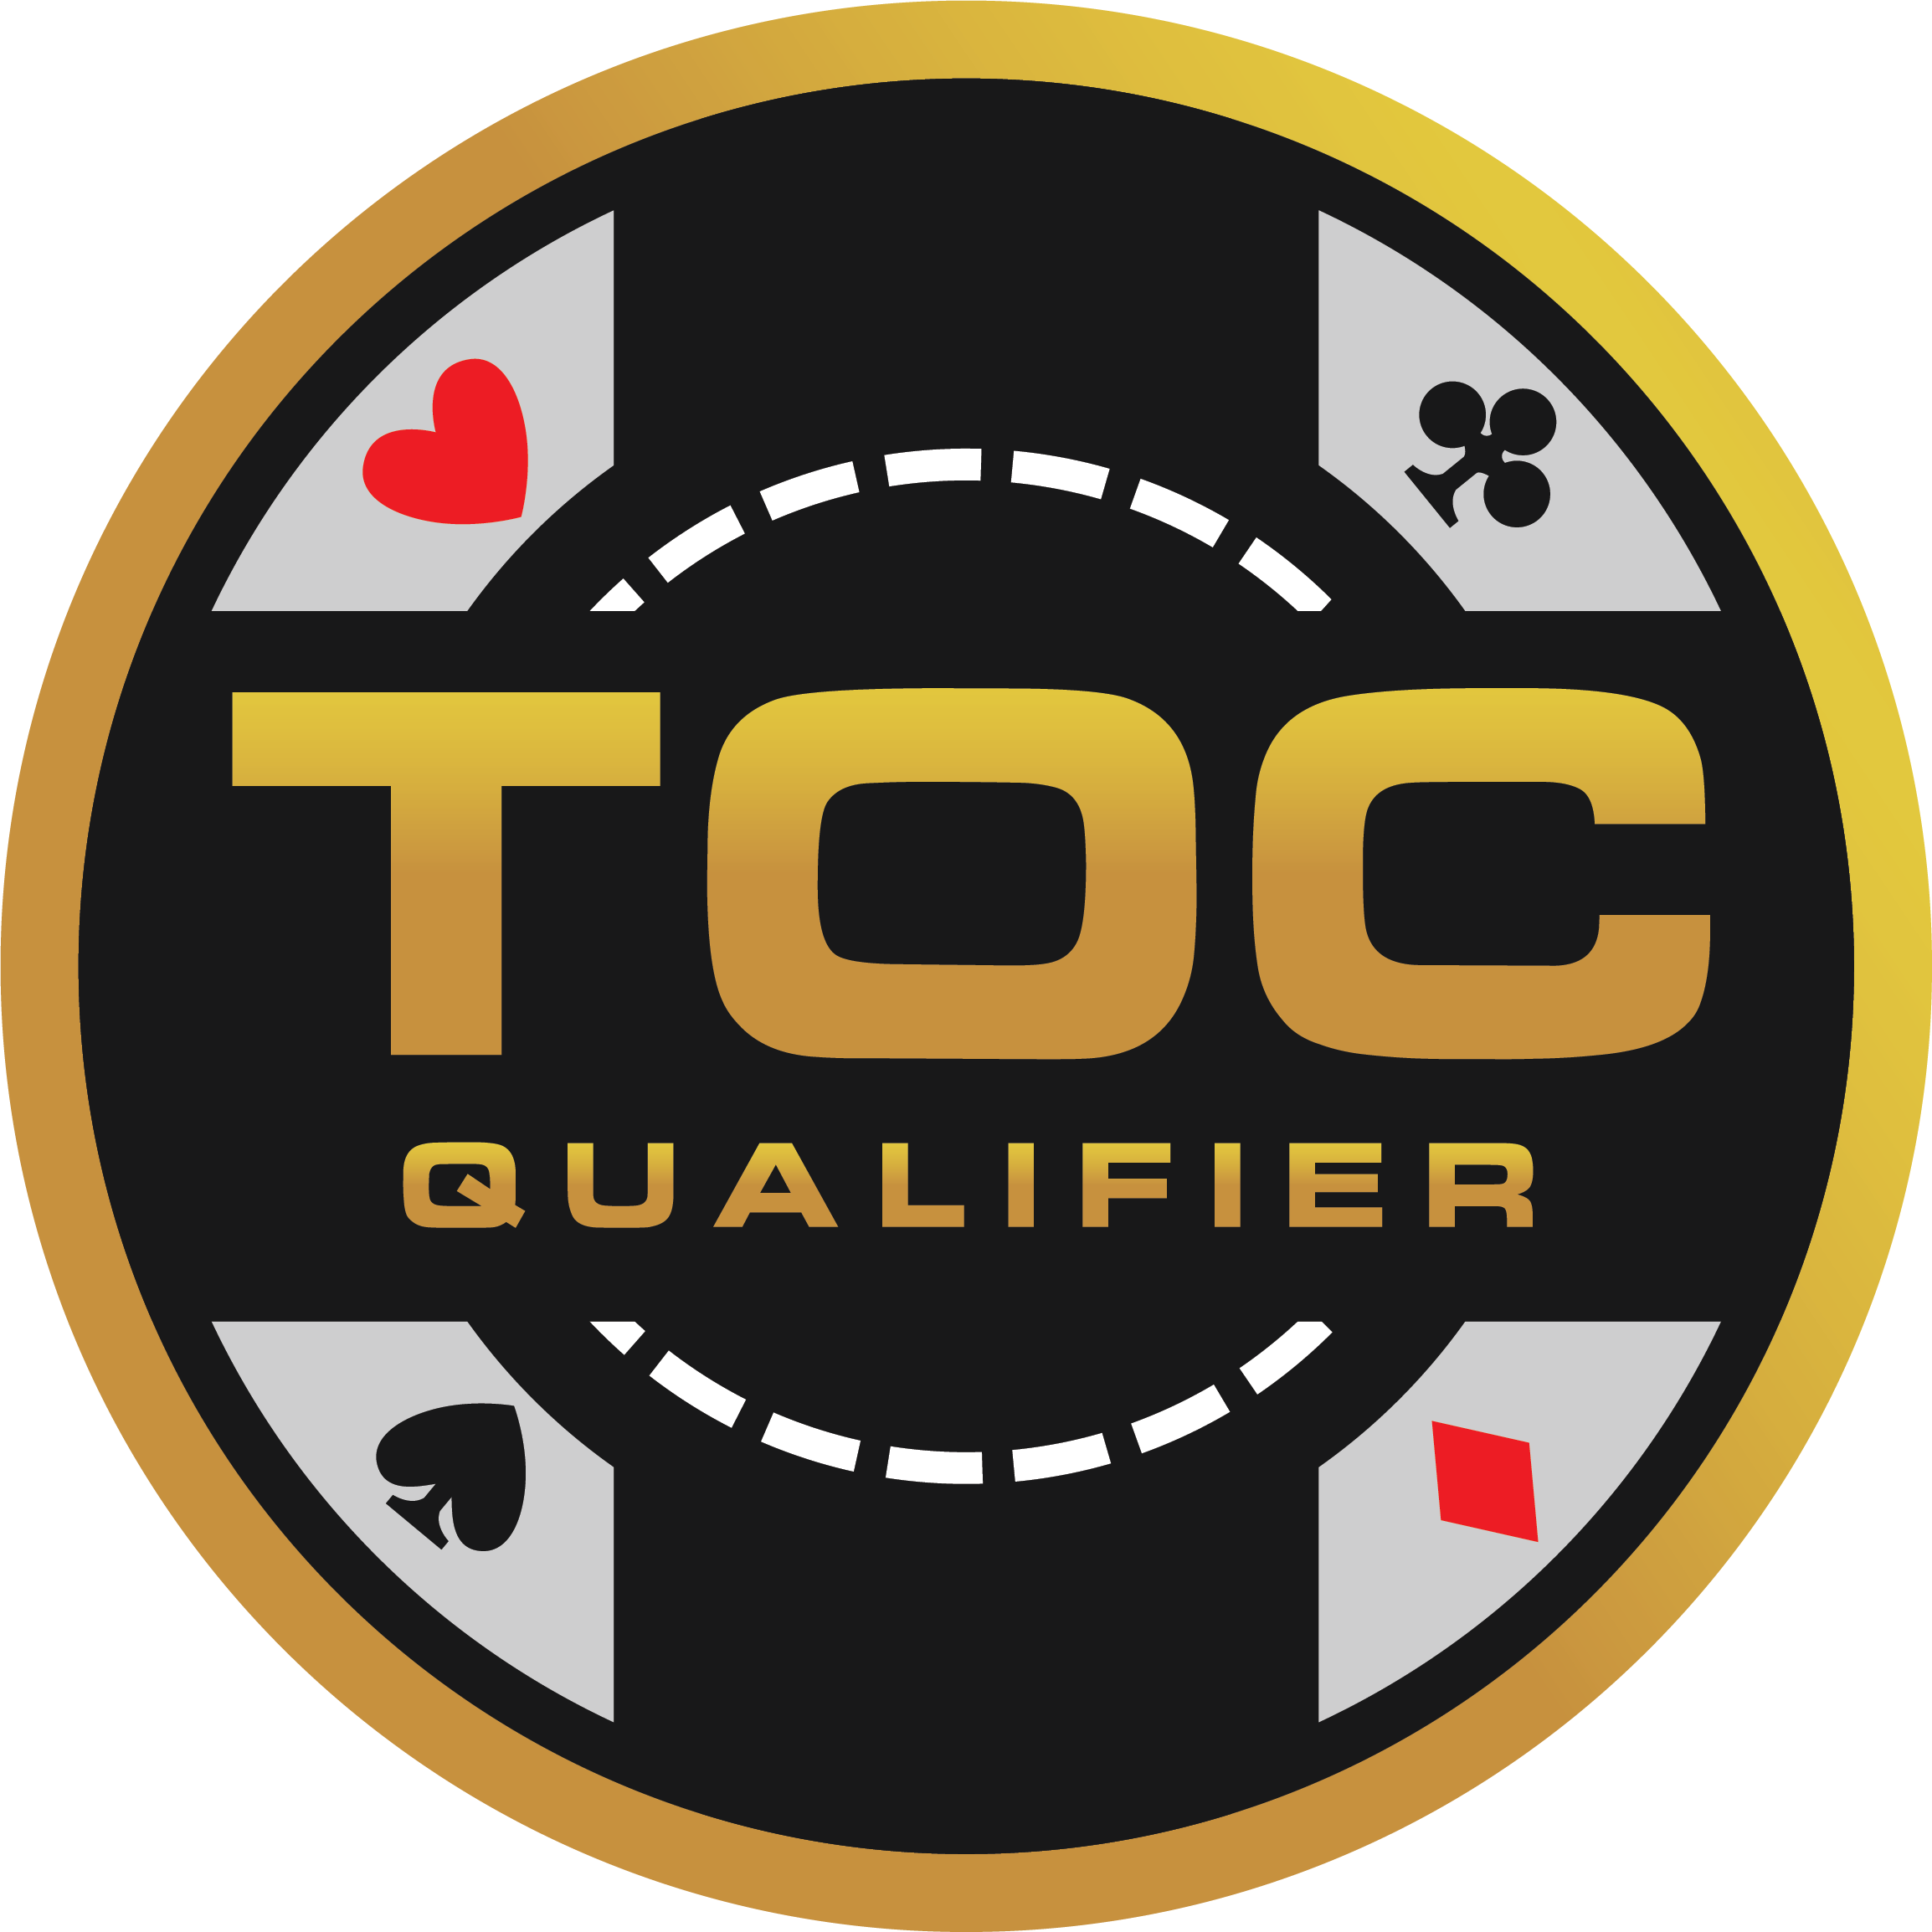 Tournament of Qualifiers